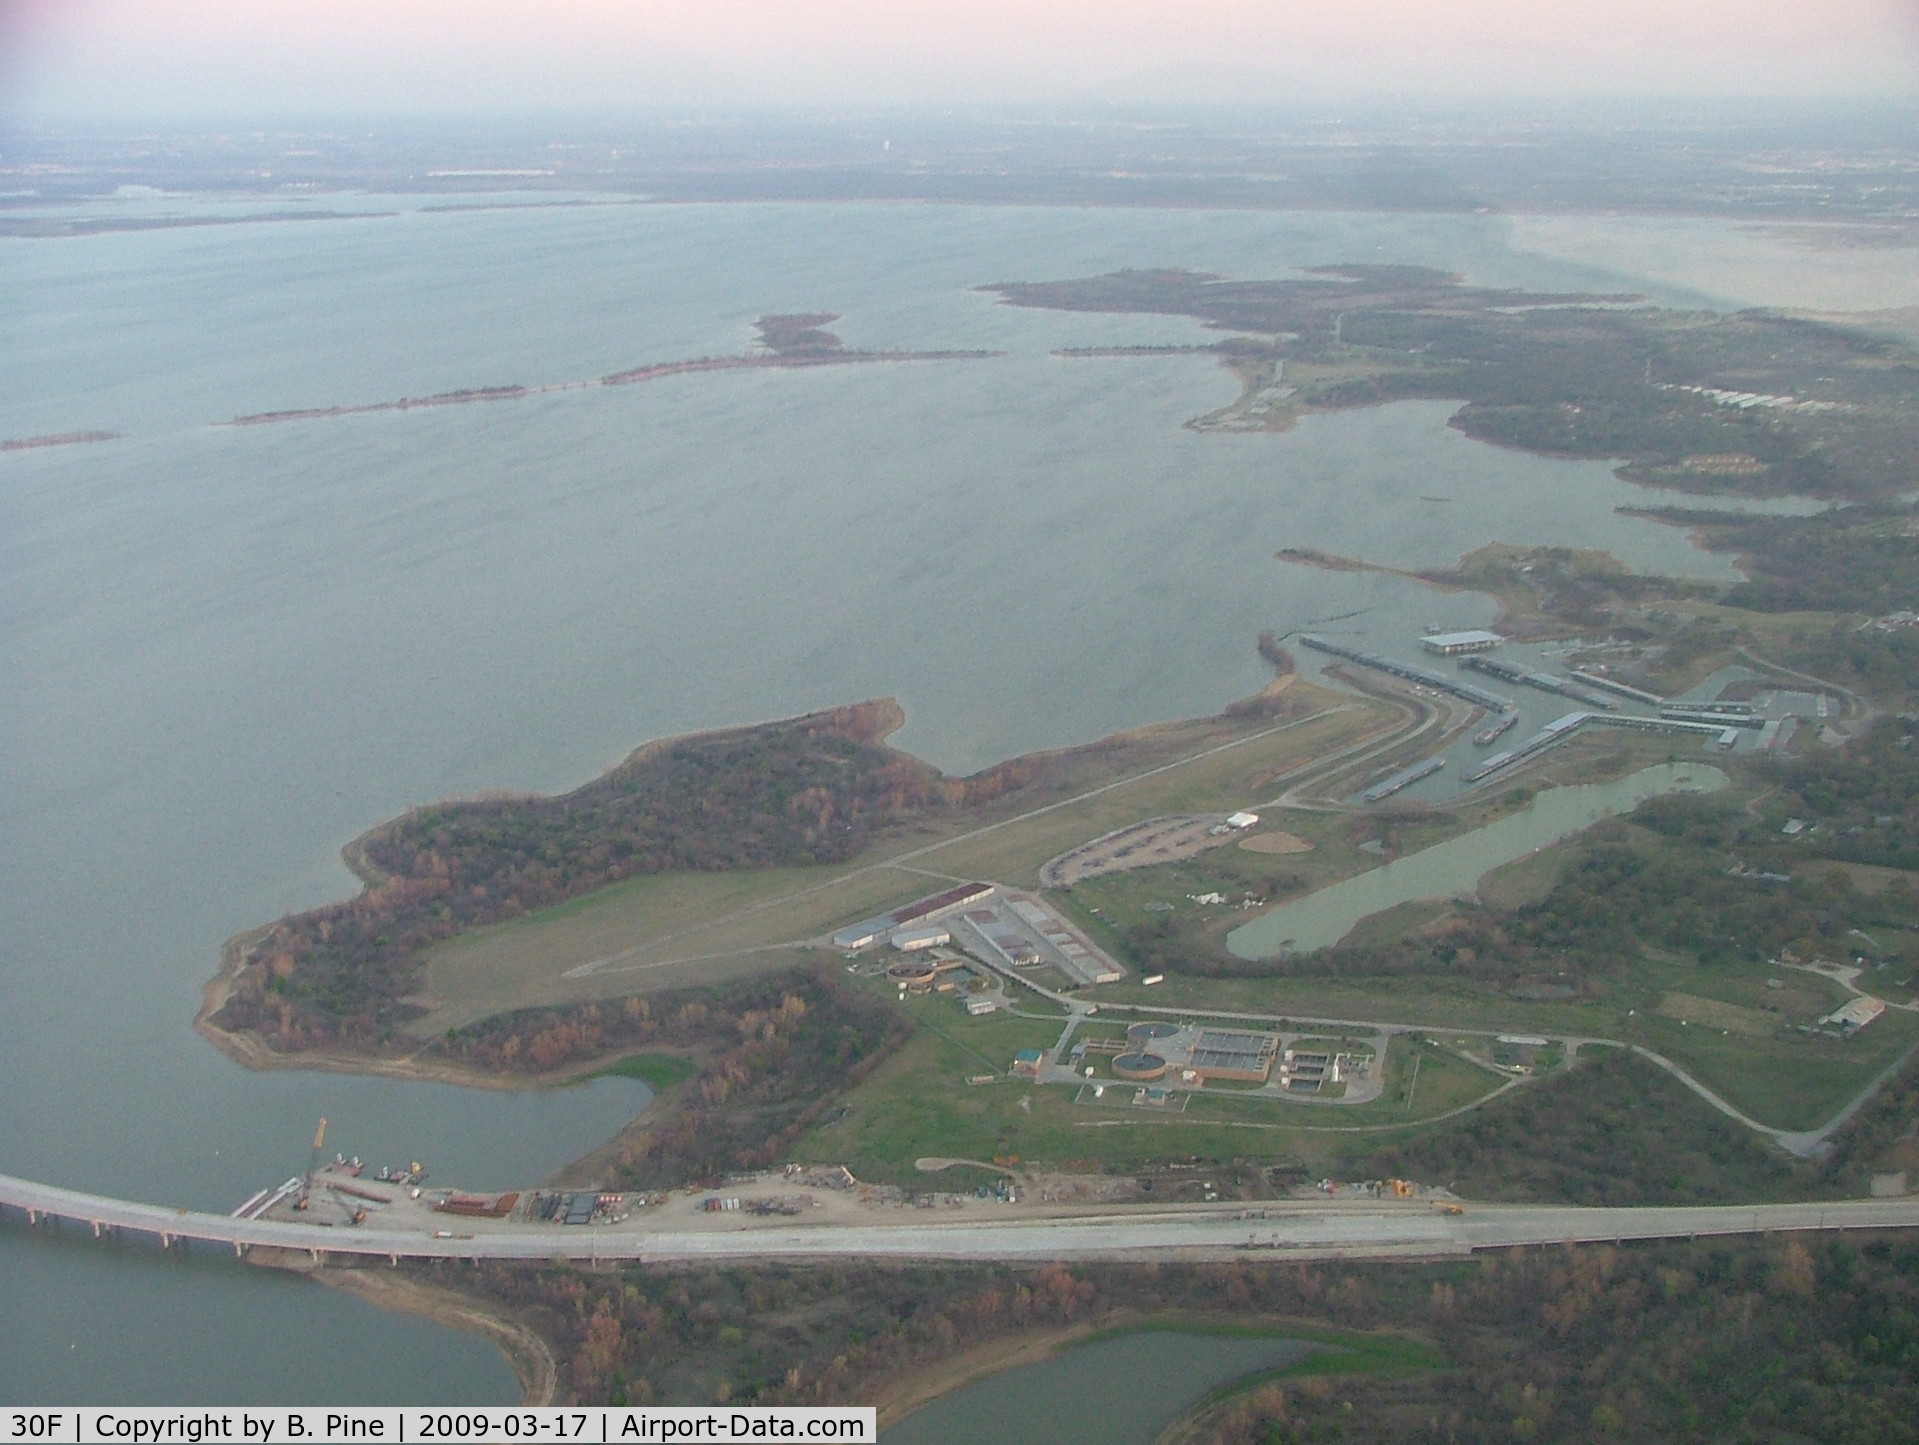 Lakeview Airport (30F) - Looking South with the new Toll-bridge (UC) in the foreground.